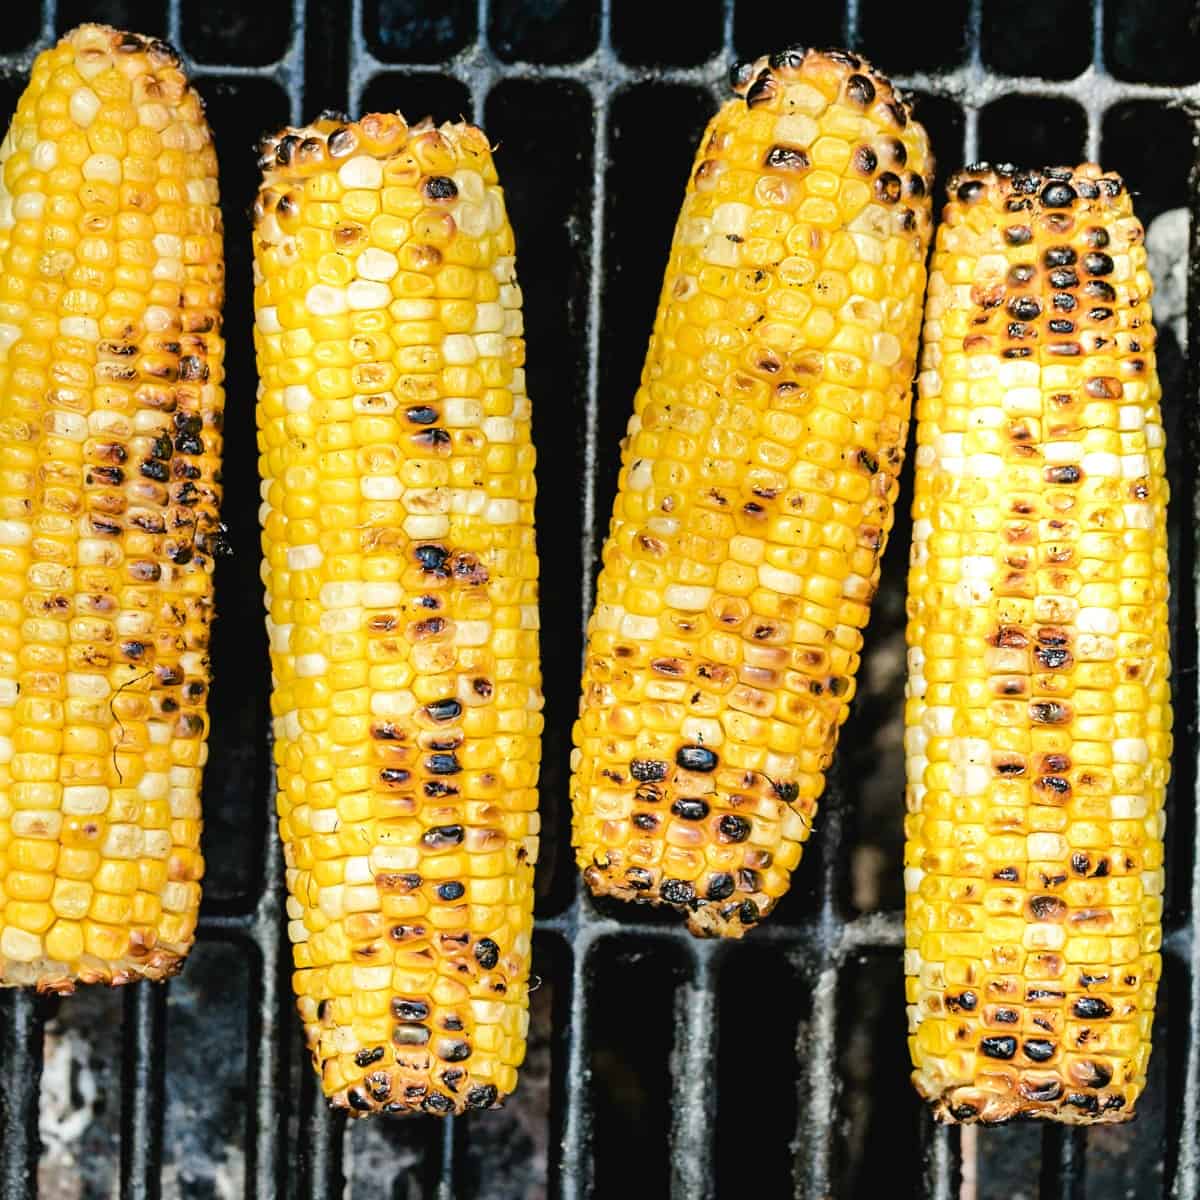 How To Grill Corn On The Cob The Best Corn On The Cob,Learn How To Crochet For Beginners